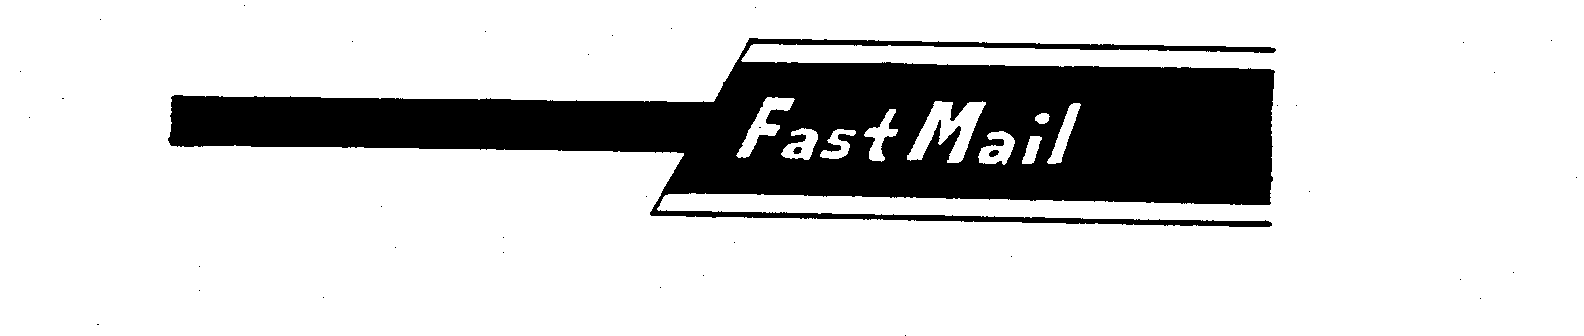 FASTMAIL